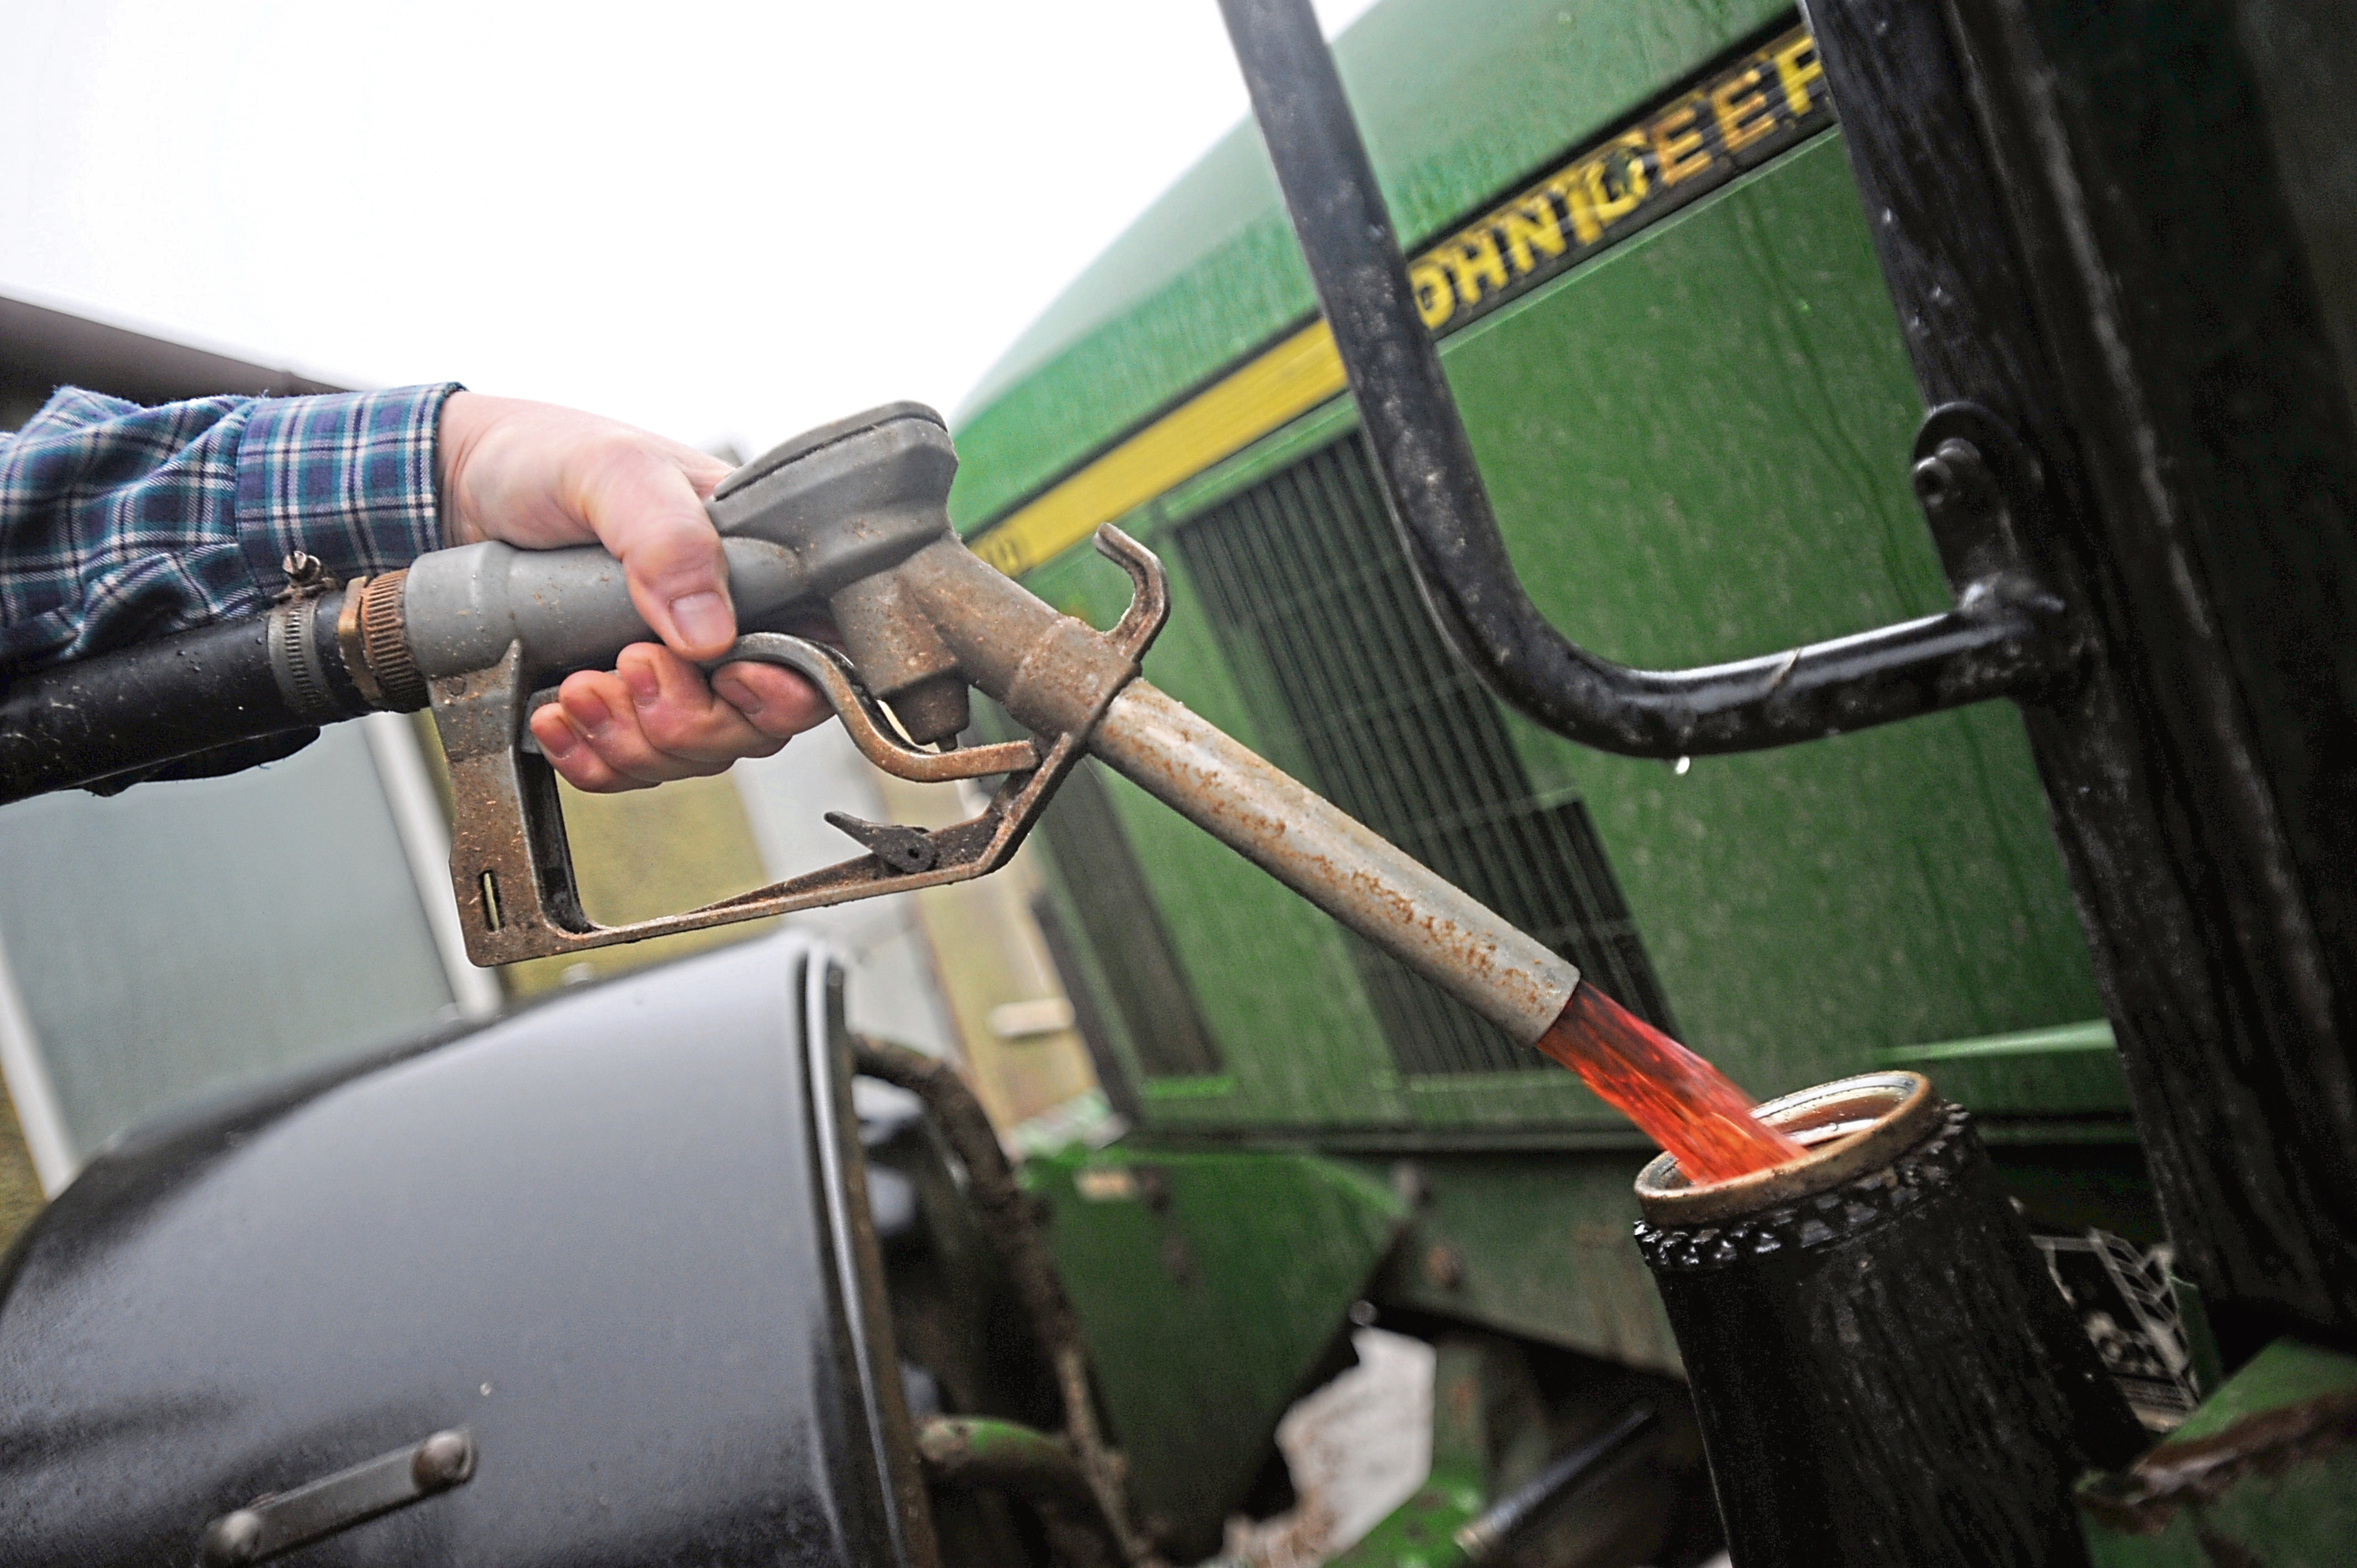 Hundreds of NFU Scotland members have complained about the impact the biodiesel inclusion rate appears to be having on farm vehicles.